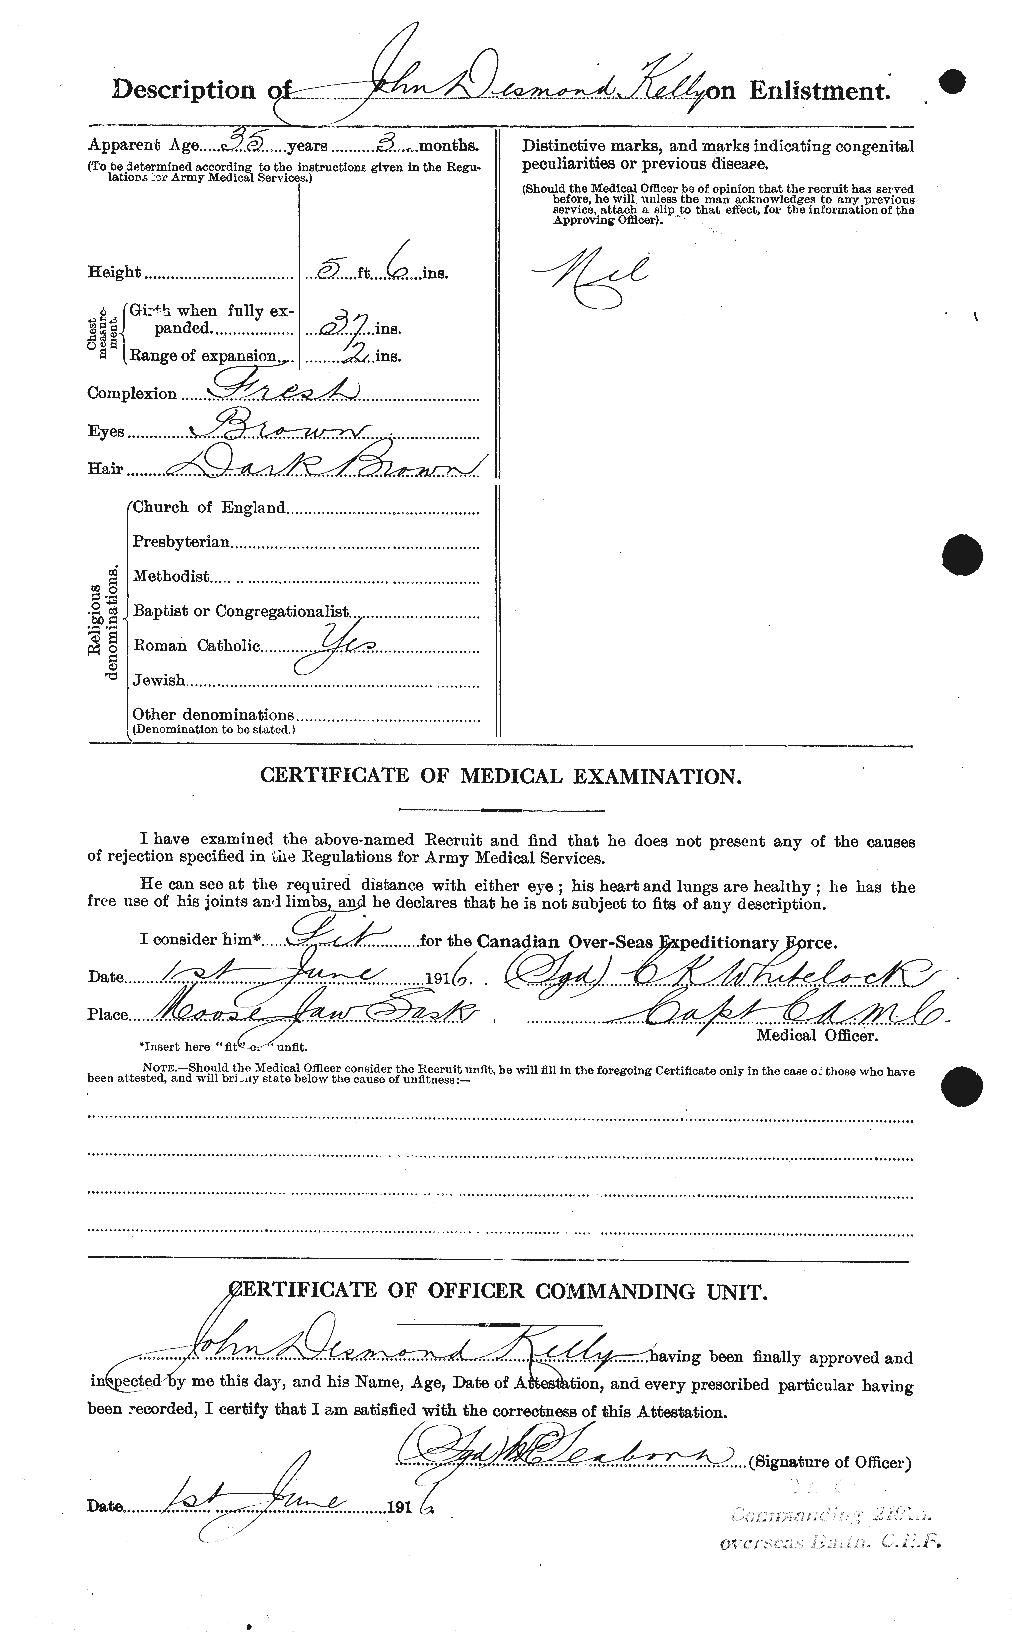 Personnel Records of the First World War - CEF 433539b